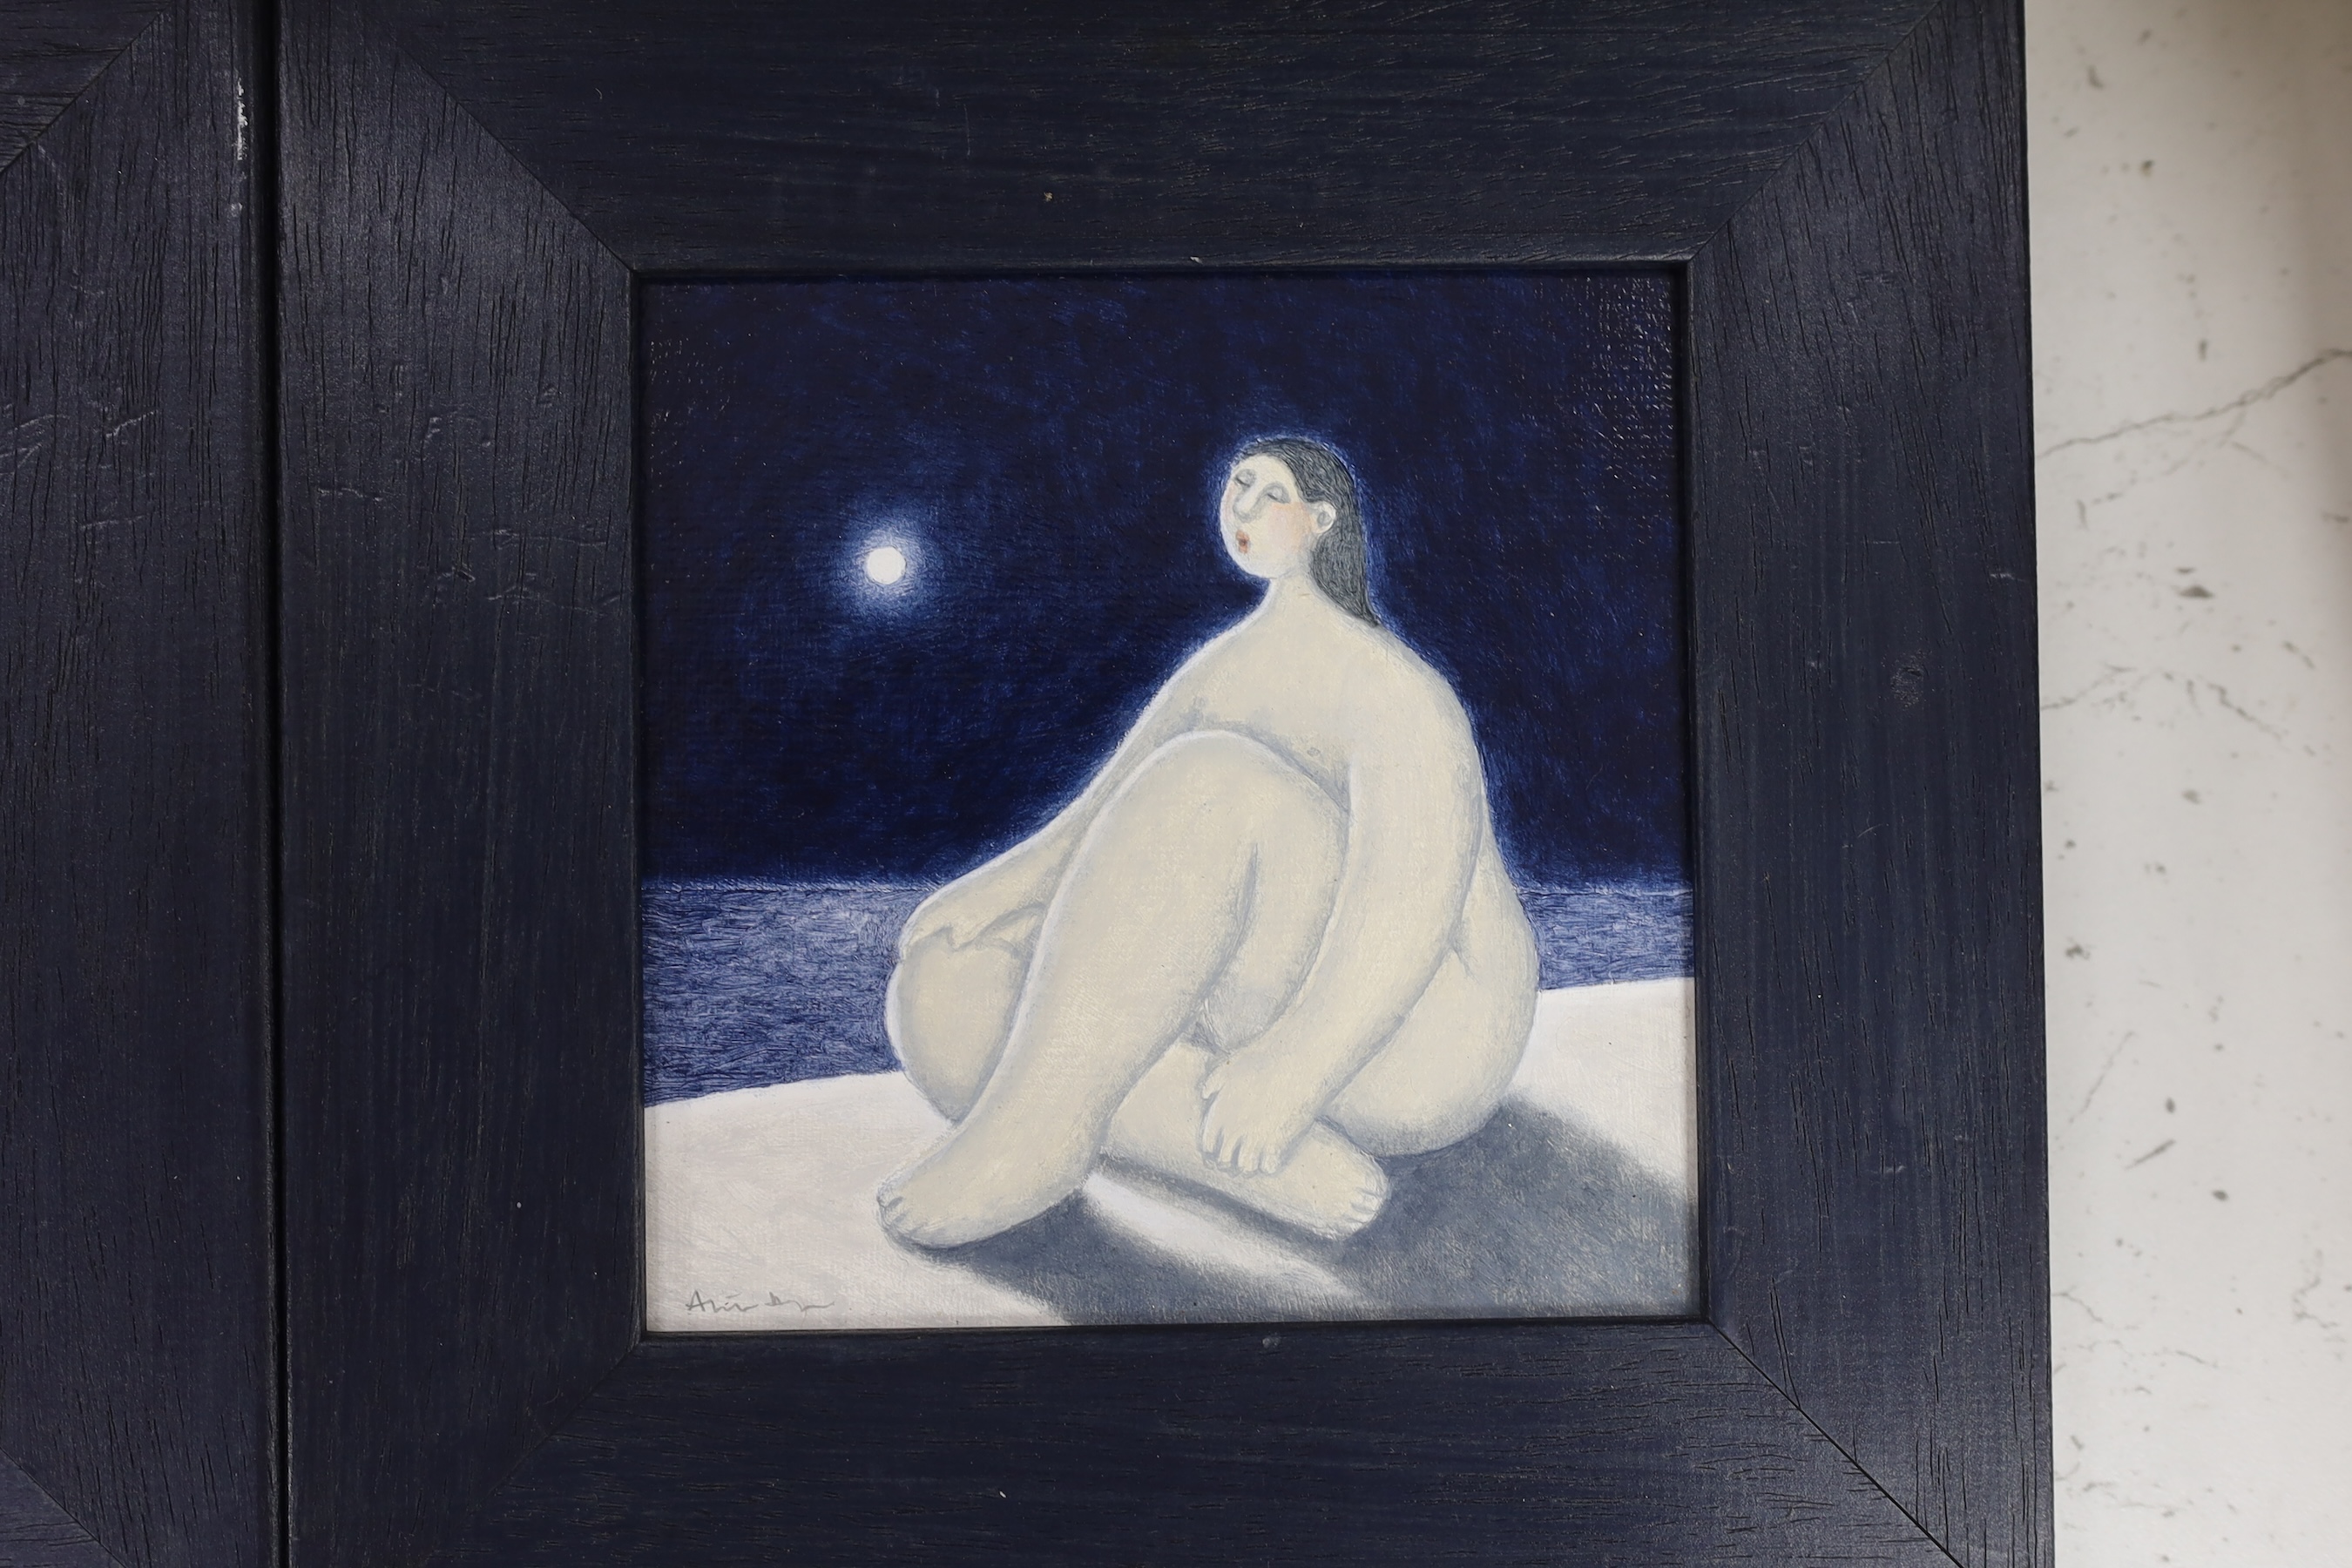 Aliisa Hyslop (b.1957), pair of contemporary acrylics on board, Moonlit landscapes with seated nude figures, signed, 13.5 x 13.5cm